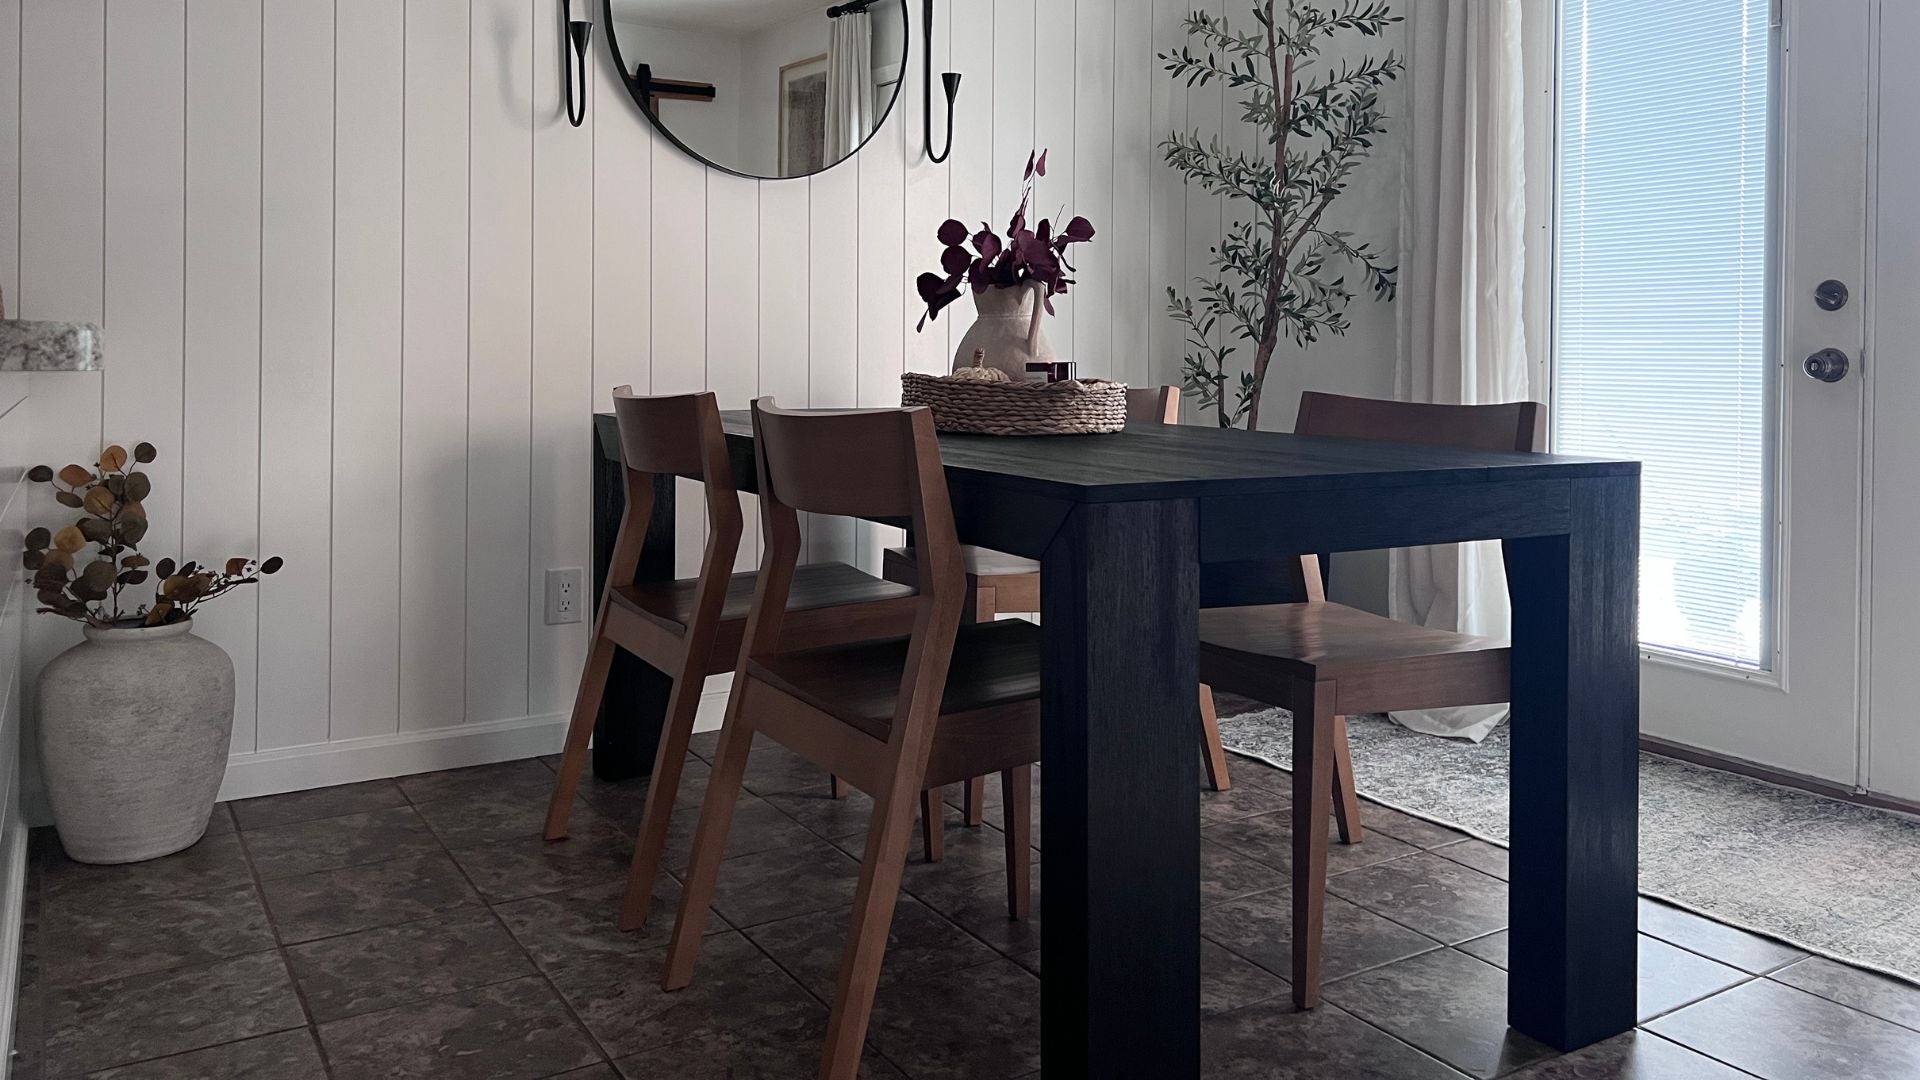 Solid wood black kitchen table with solid wood dining chairs in pecan